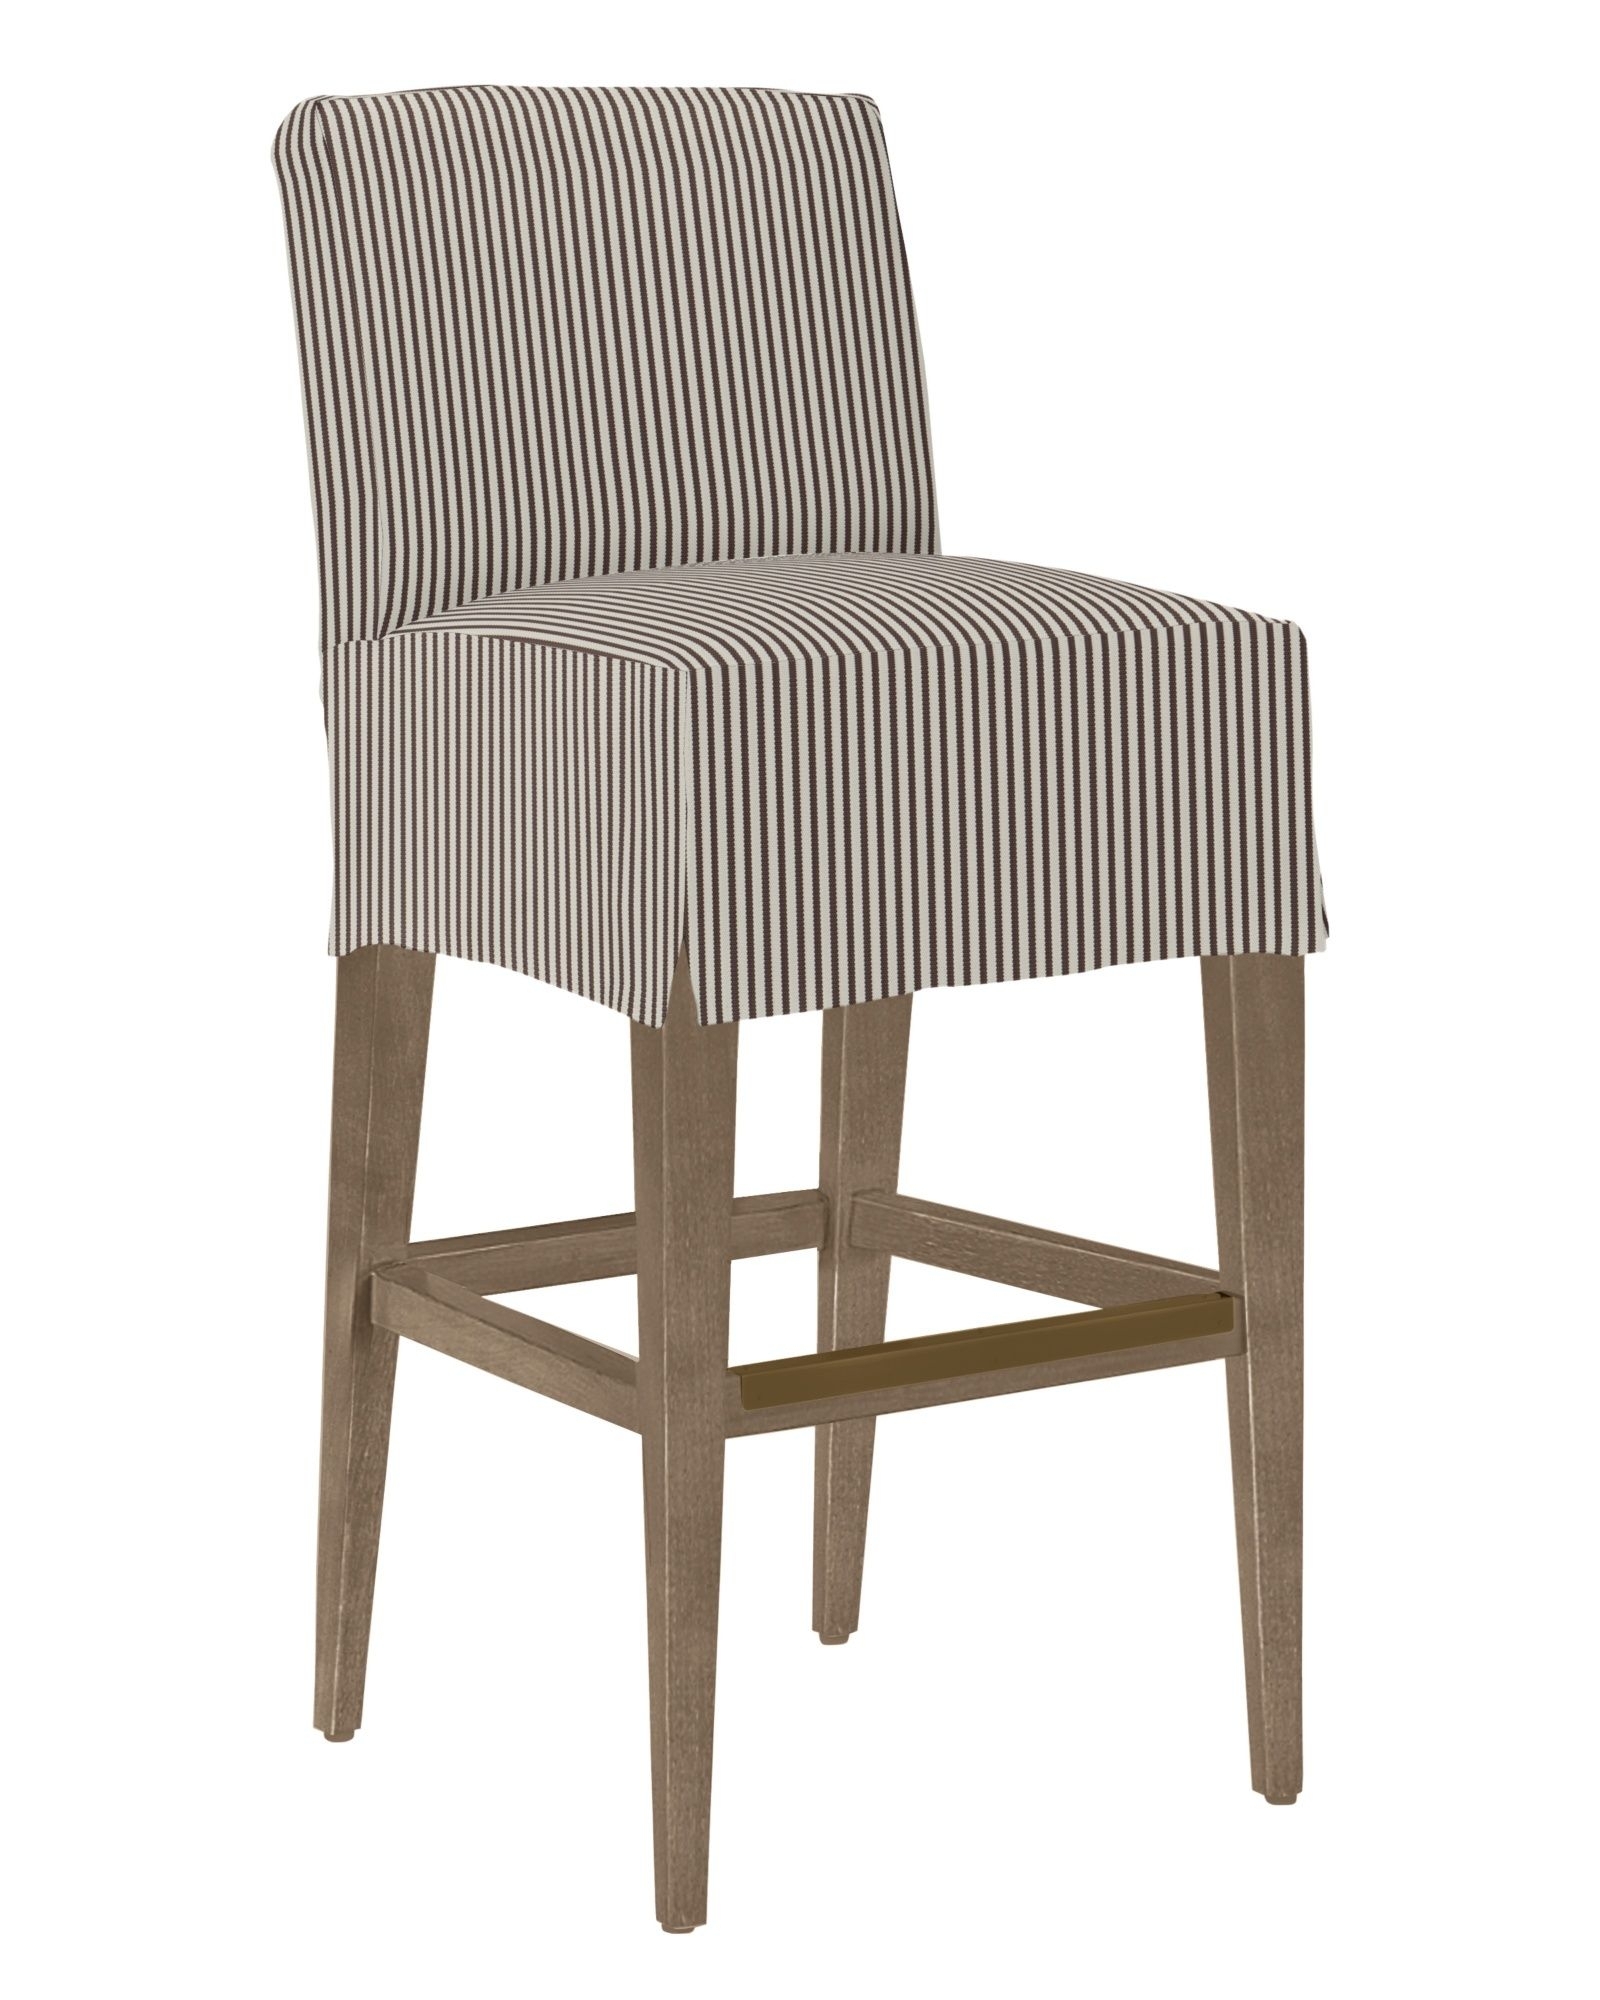 Details about   Dining Chair Cover Slipcover for Short Back Chairs Bar Counter Stools Beige 